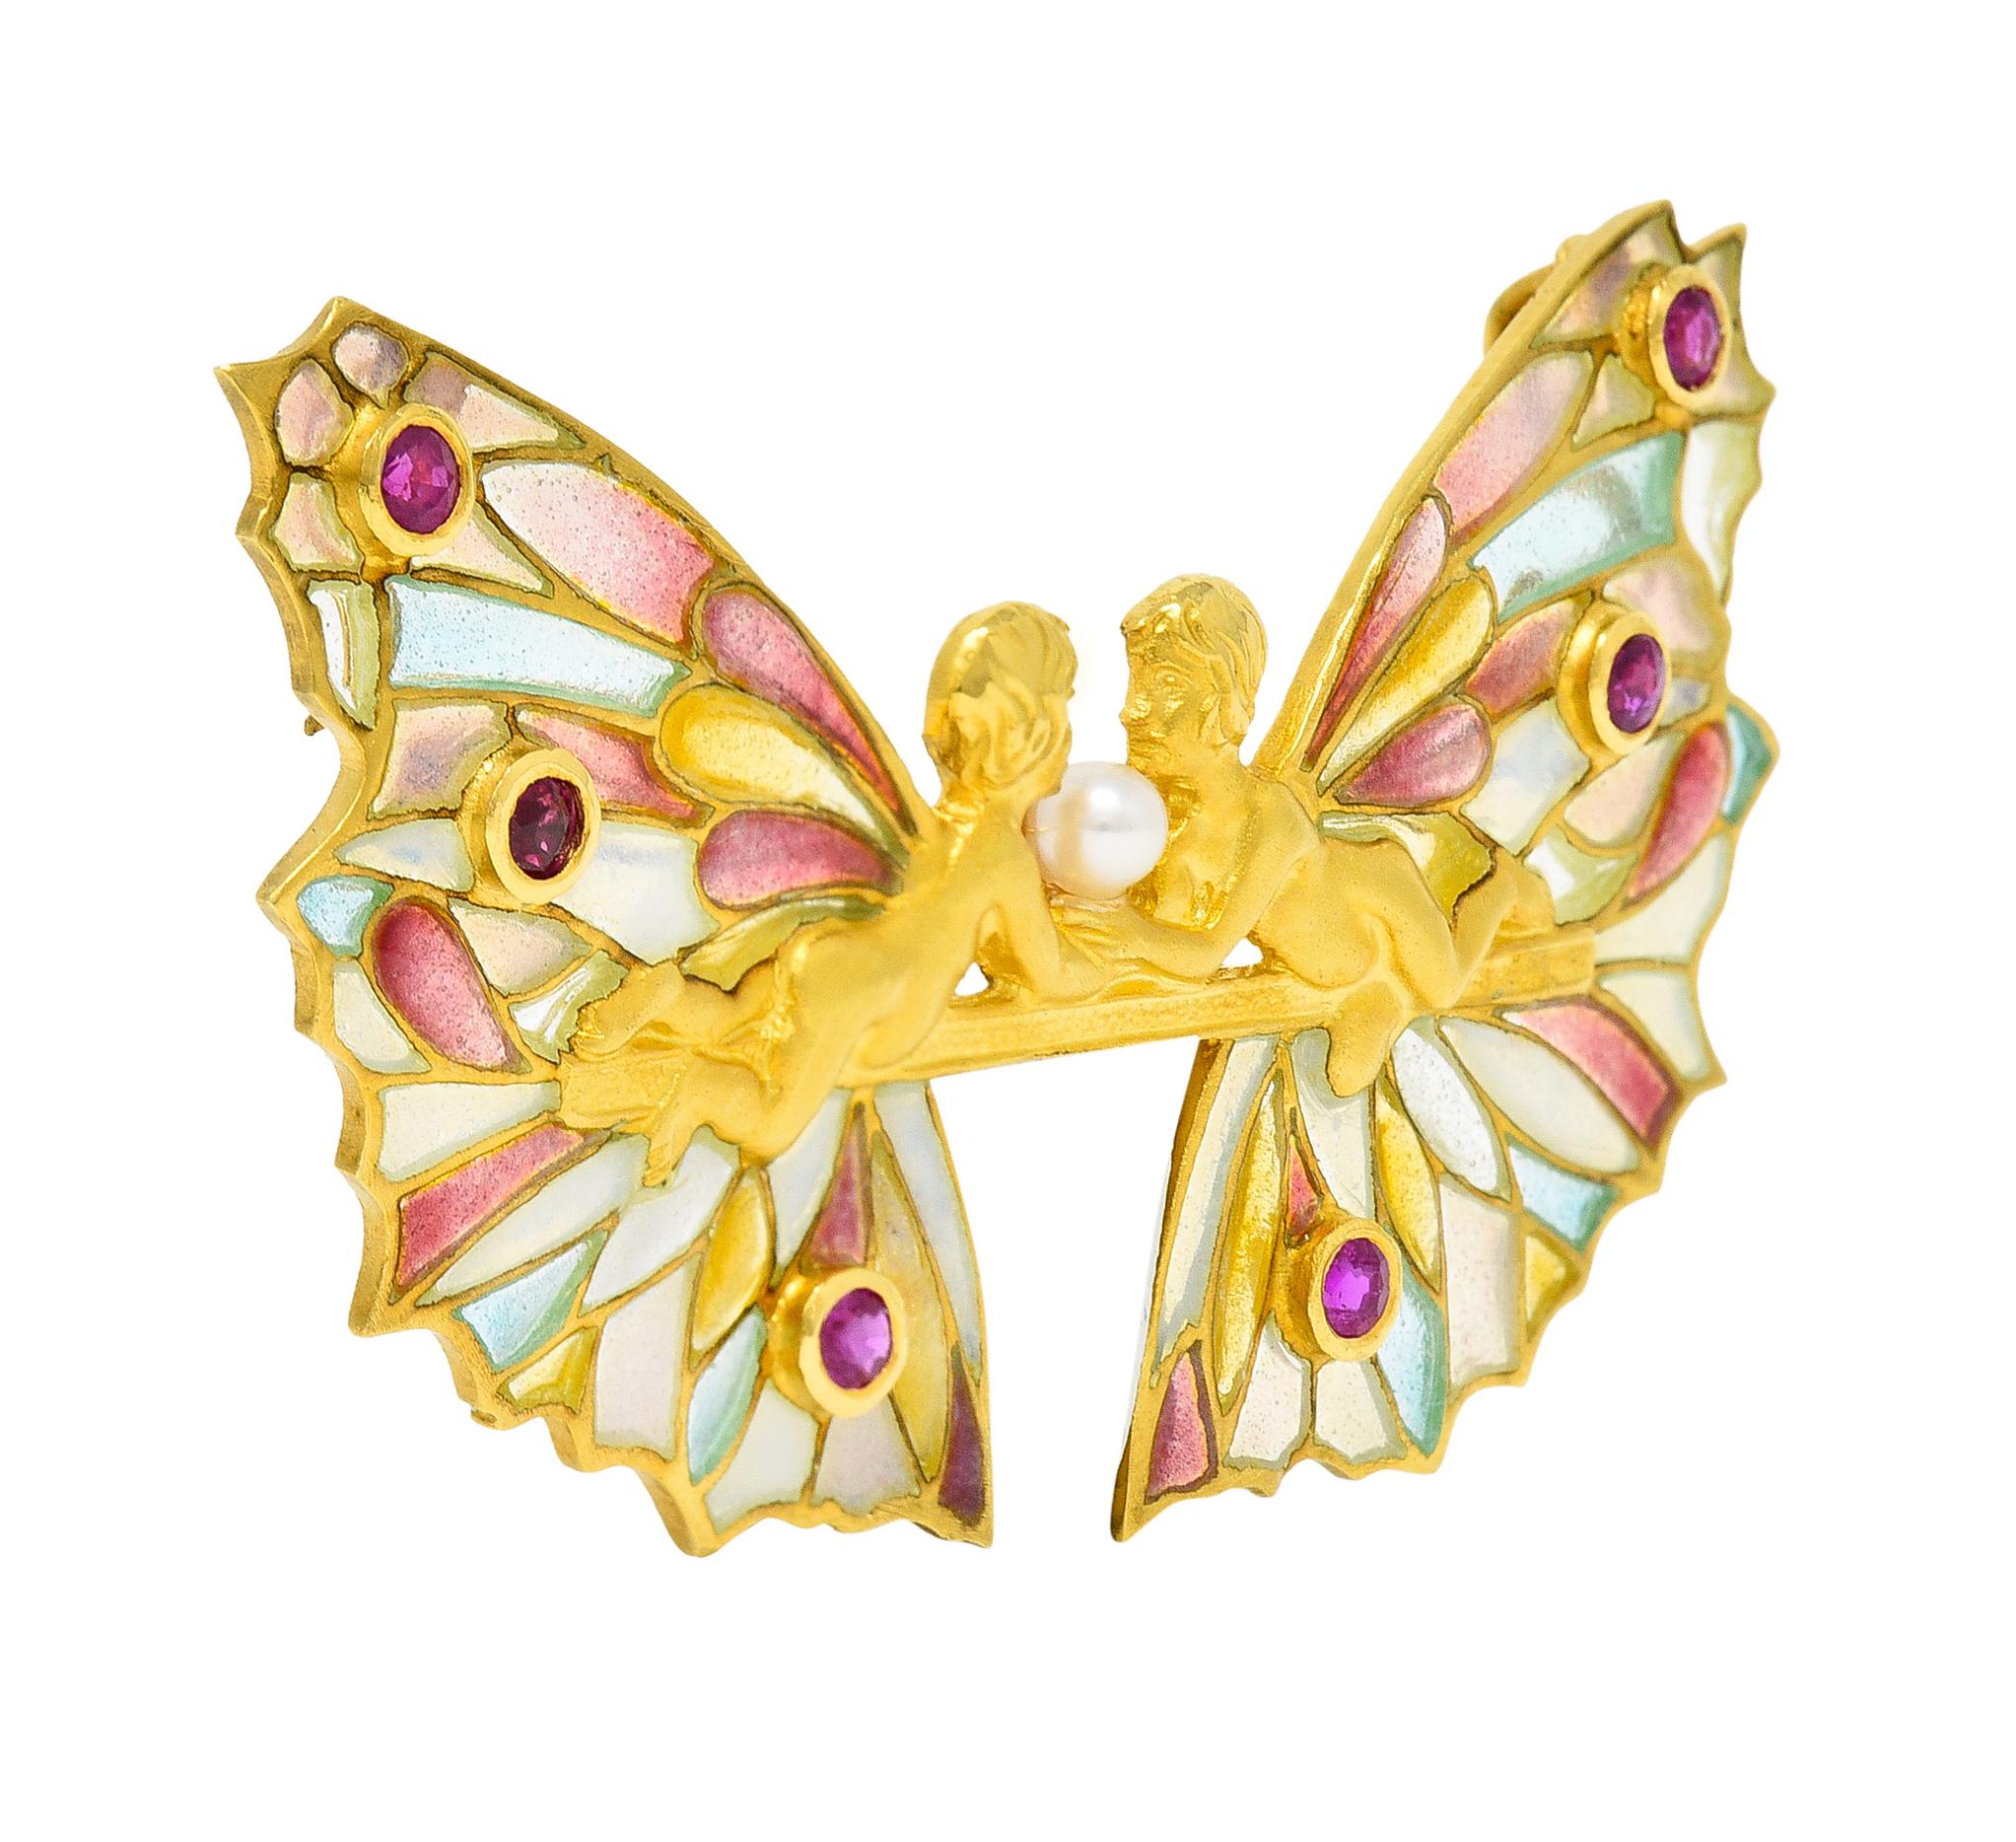 East to West pendant brooch depicts two mirrored fairy figures

With highly rendered matte gold bodies and elaborate plique-a-jour enamel wings

Glossed with semi-transparent pastel blue, pink, green, and yellow enamel - exhibiting no